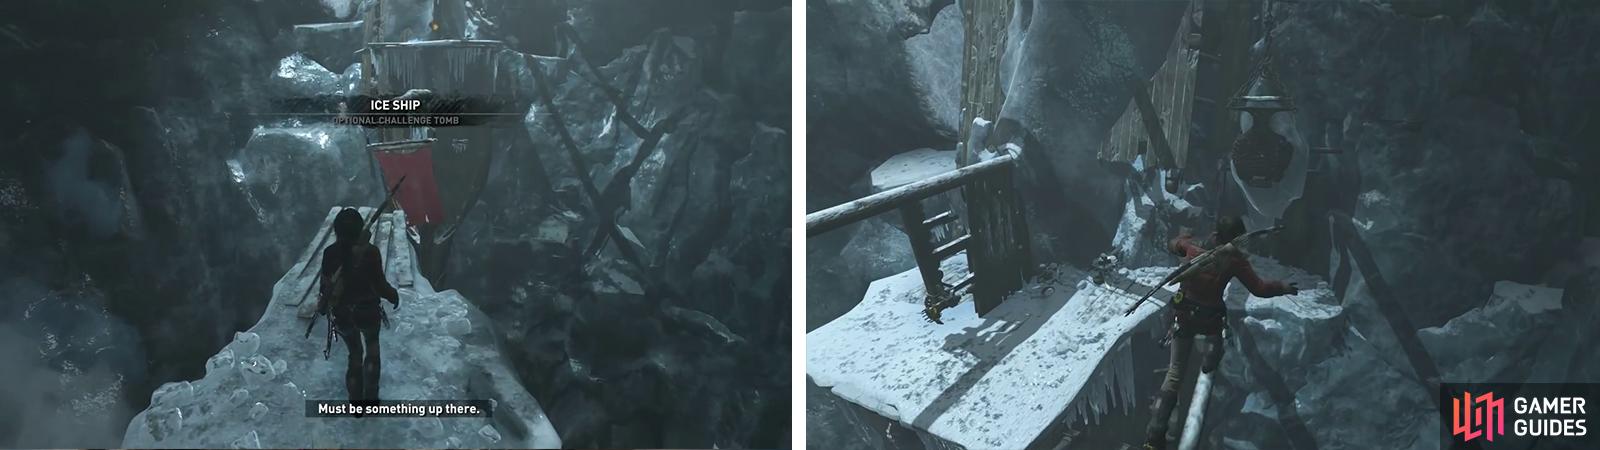 Use the bowspirit to reach the ice ship (left). Climb up and use the masts to reach the bucket - jump onto this to smash the ice on the wall (right).